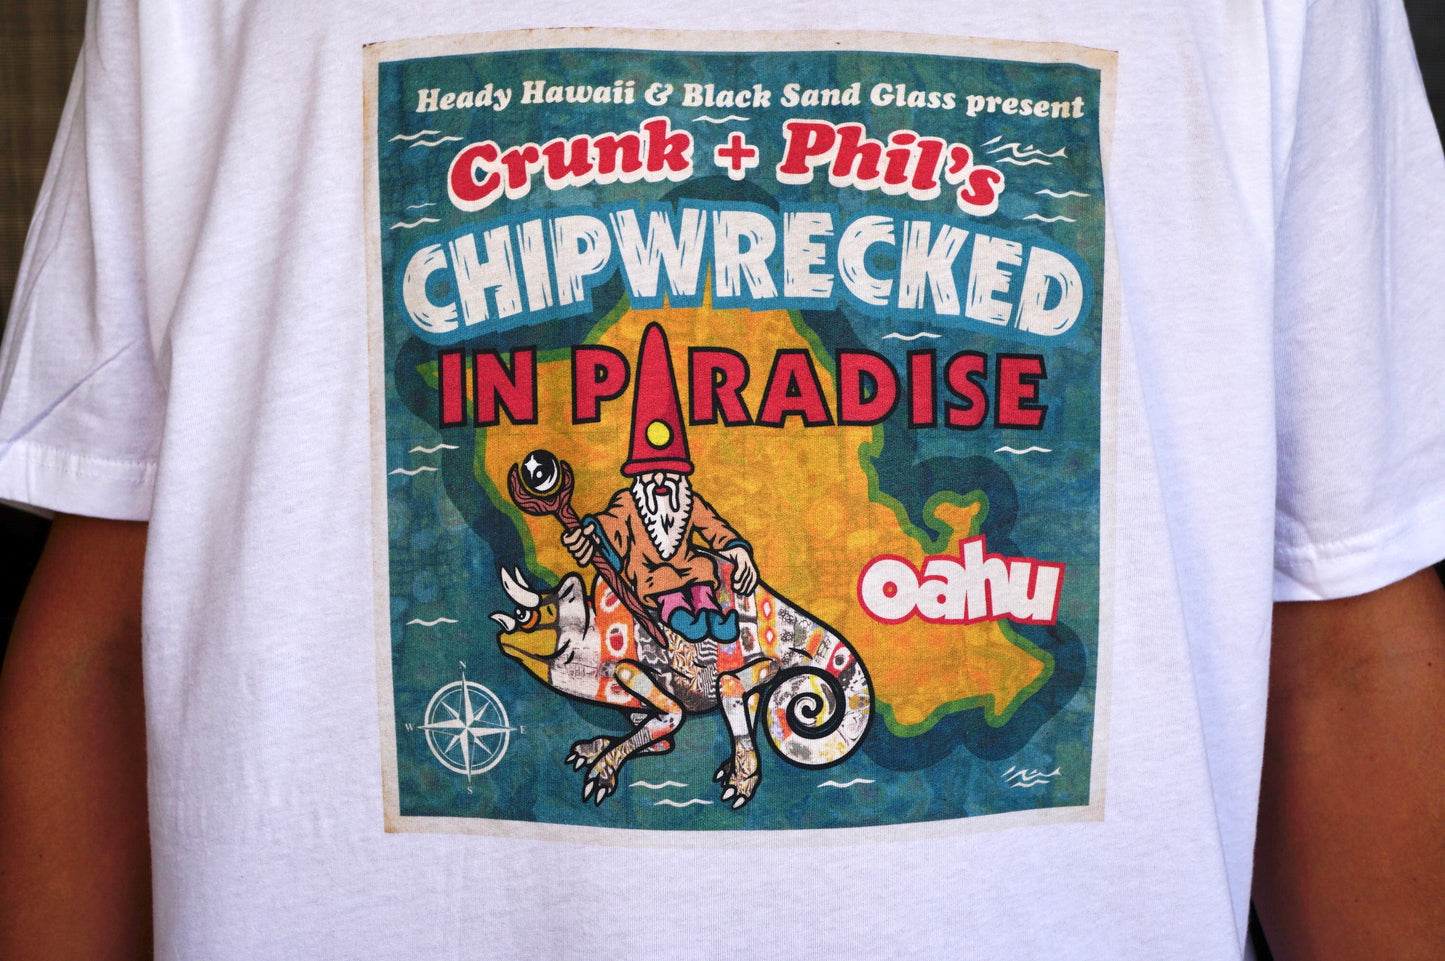 Chipwrecked in Paradise Tshirt